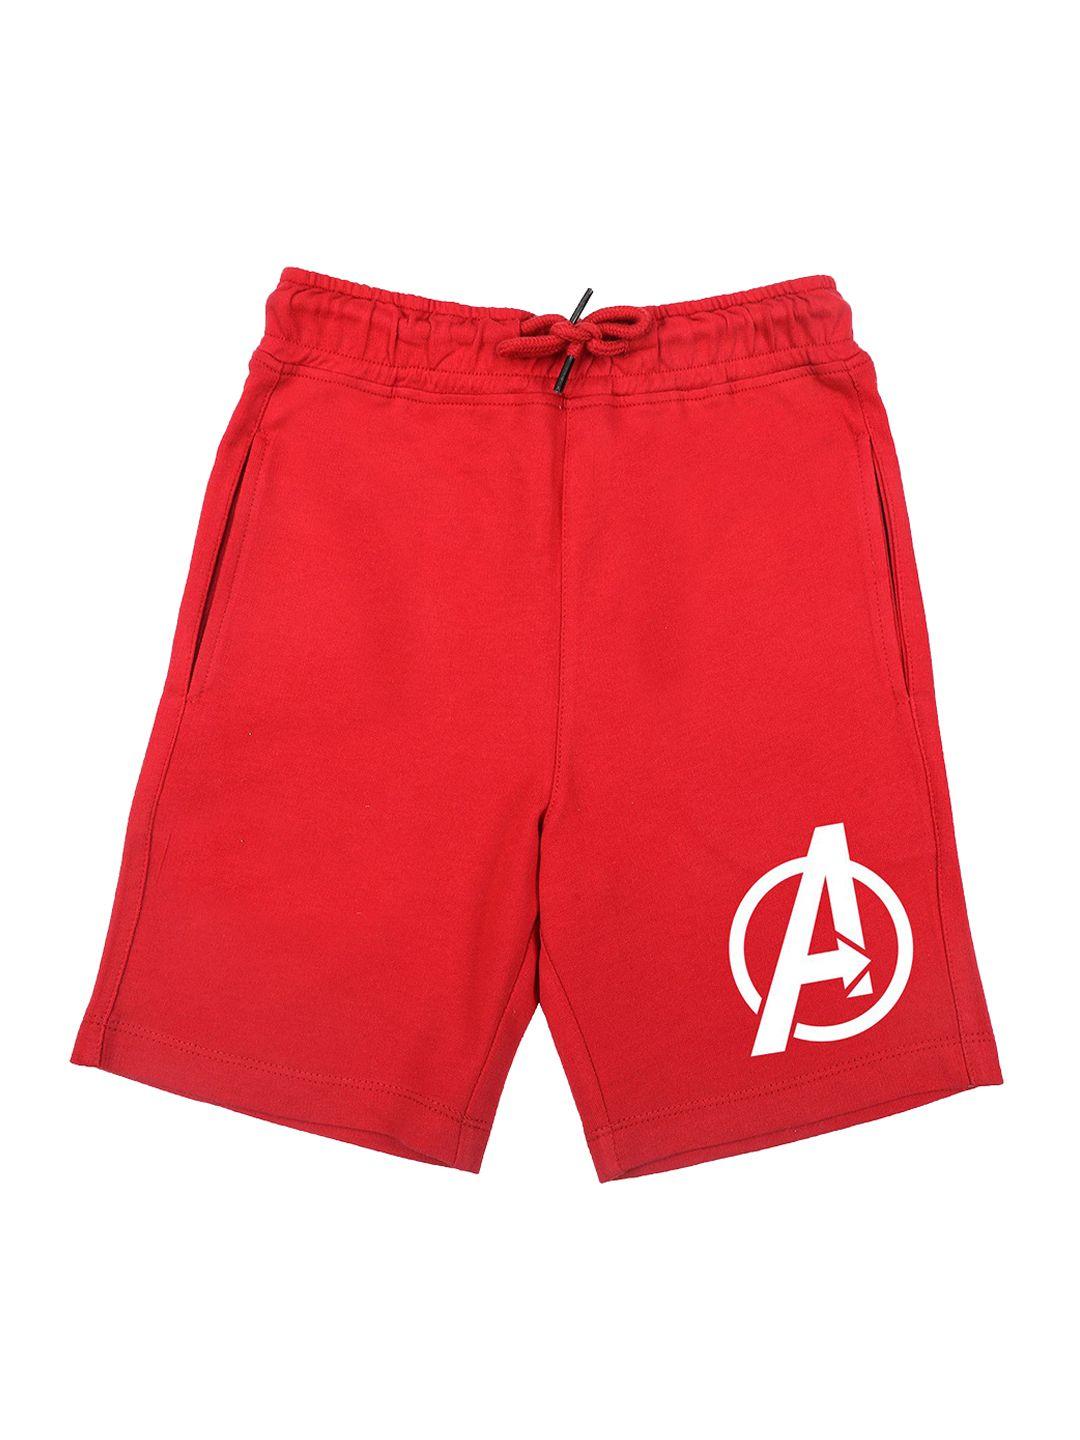 marvel by wear your mind boys red regular fit superhero printed avengers cotton shorts